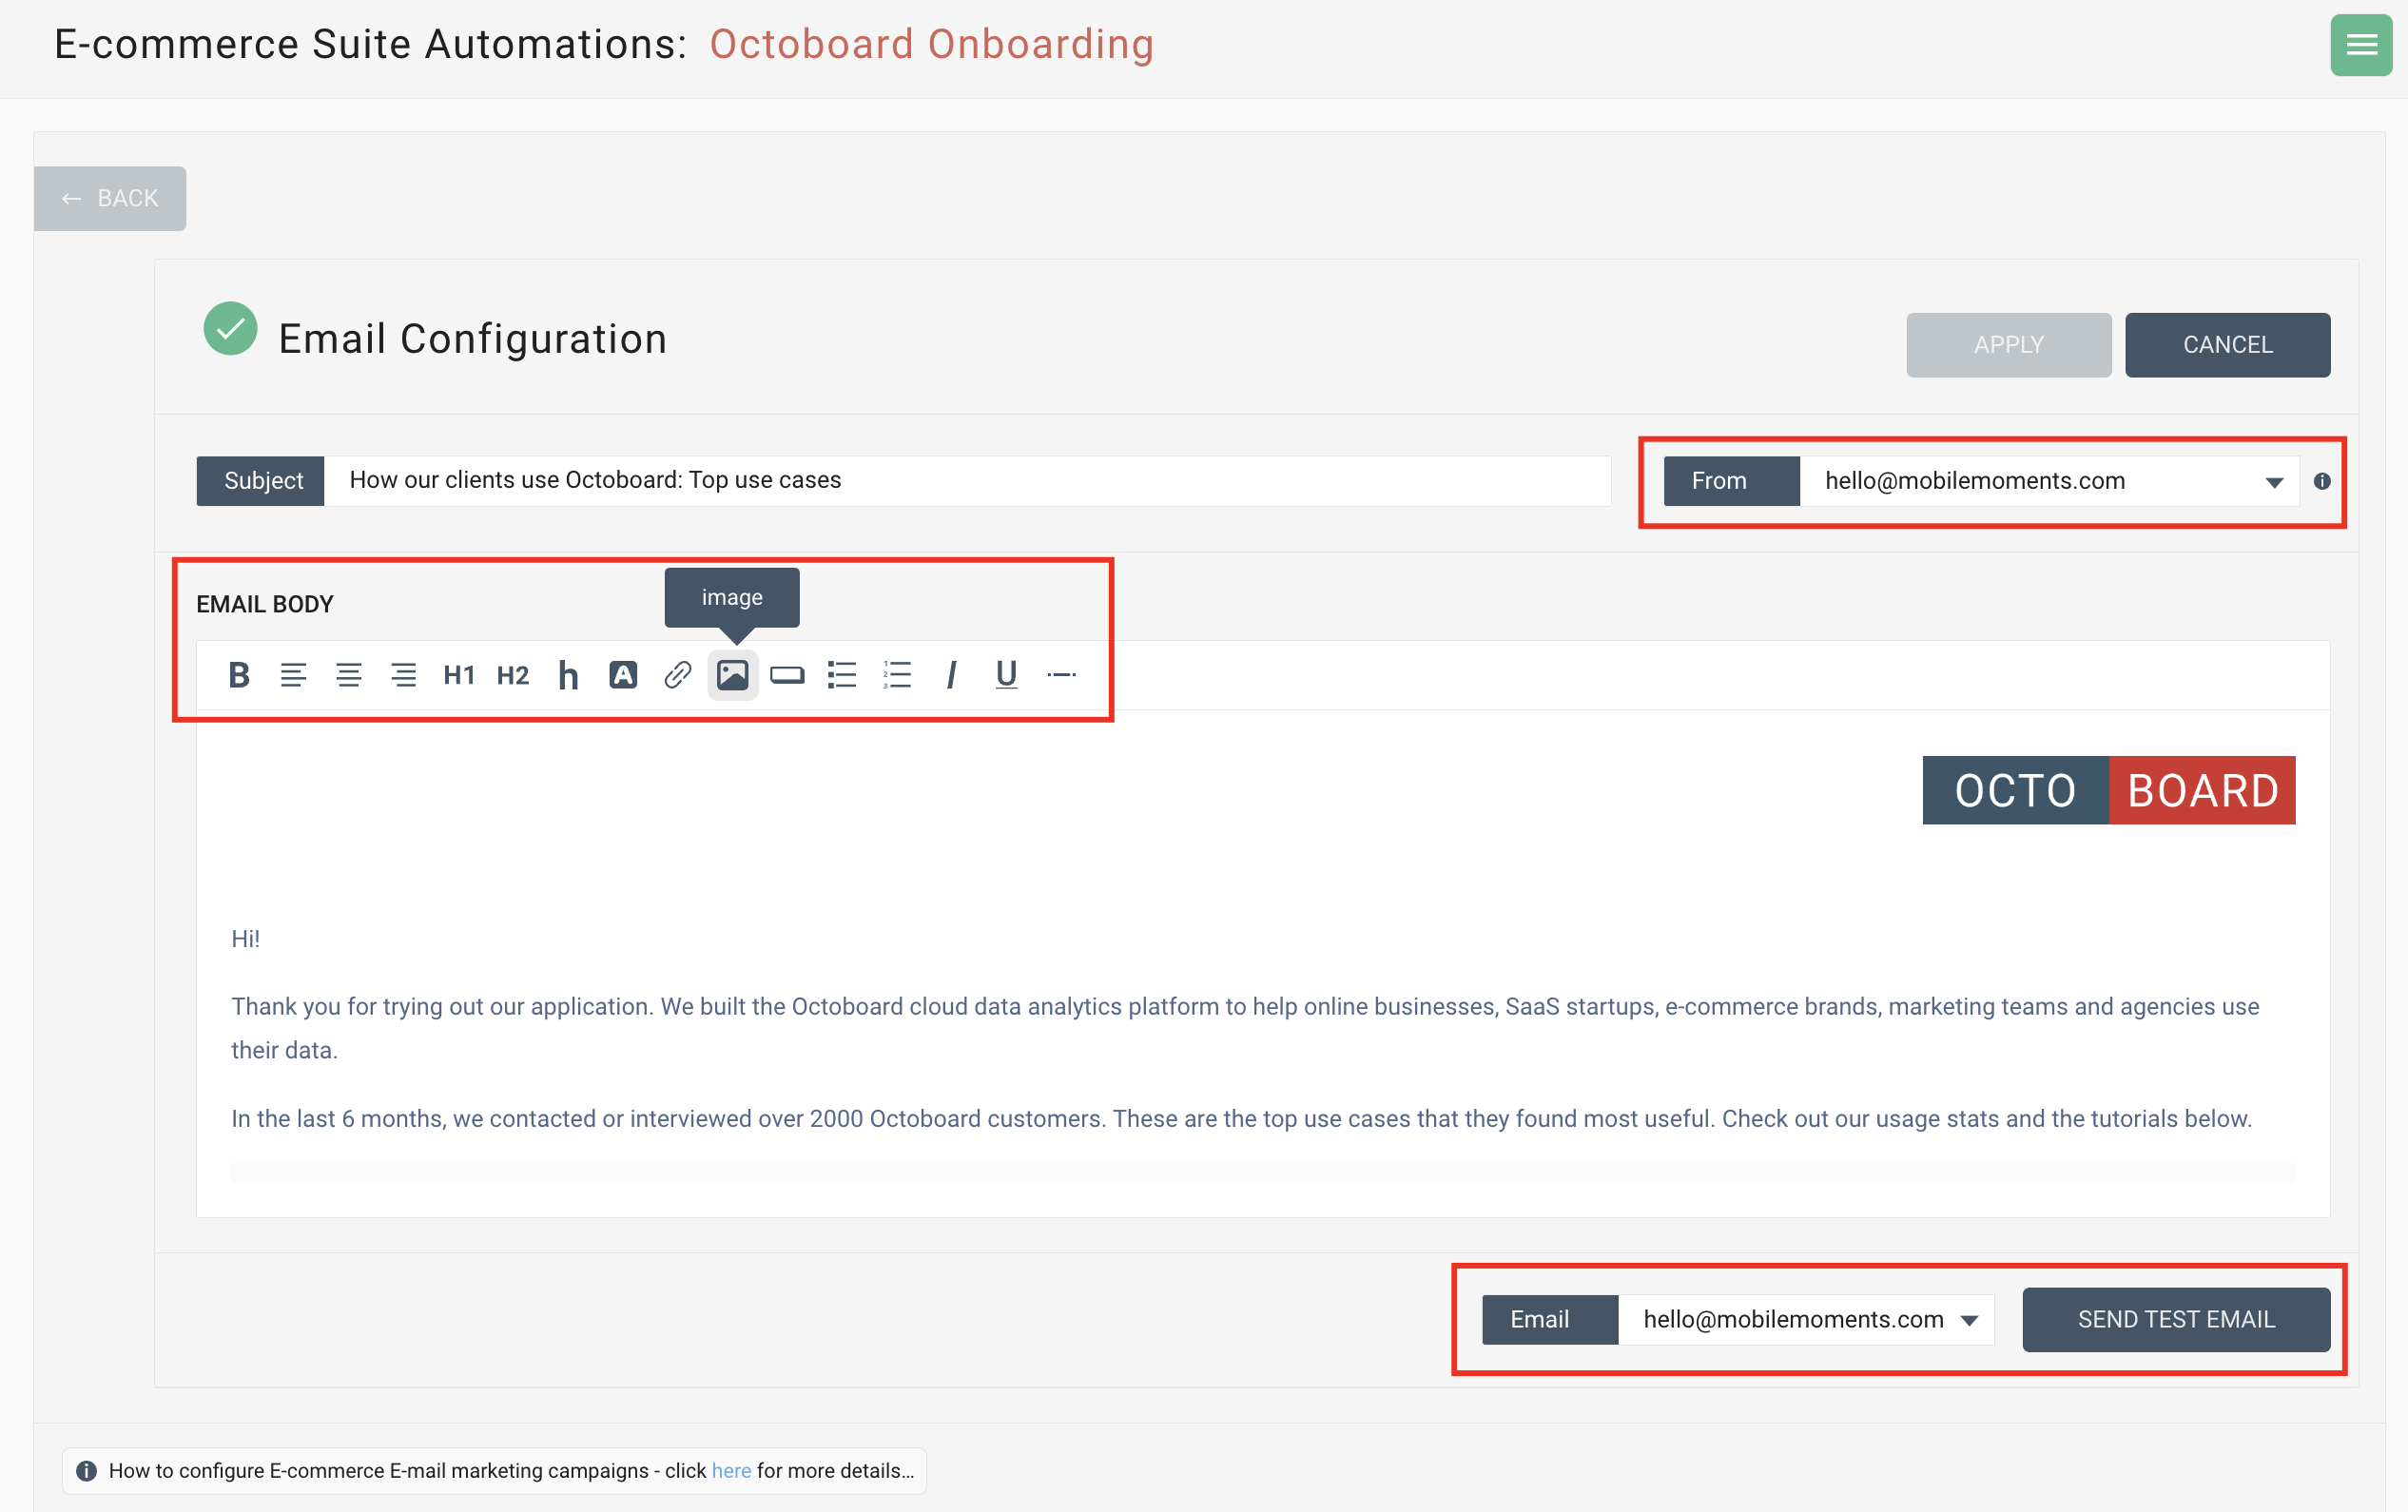 Email message configuration in automation